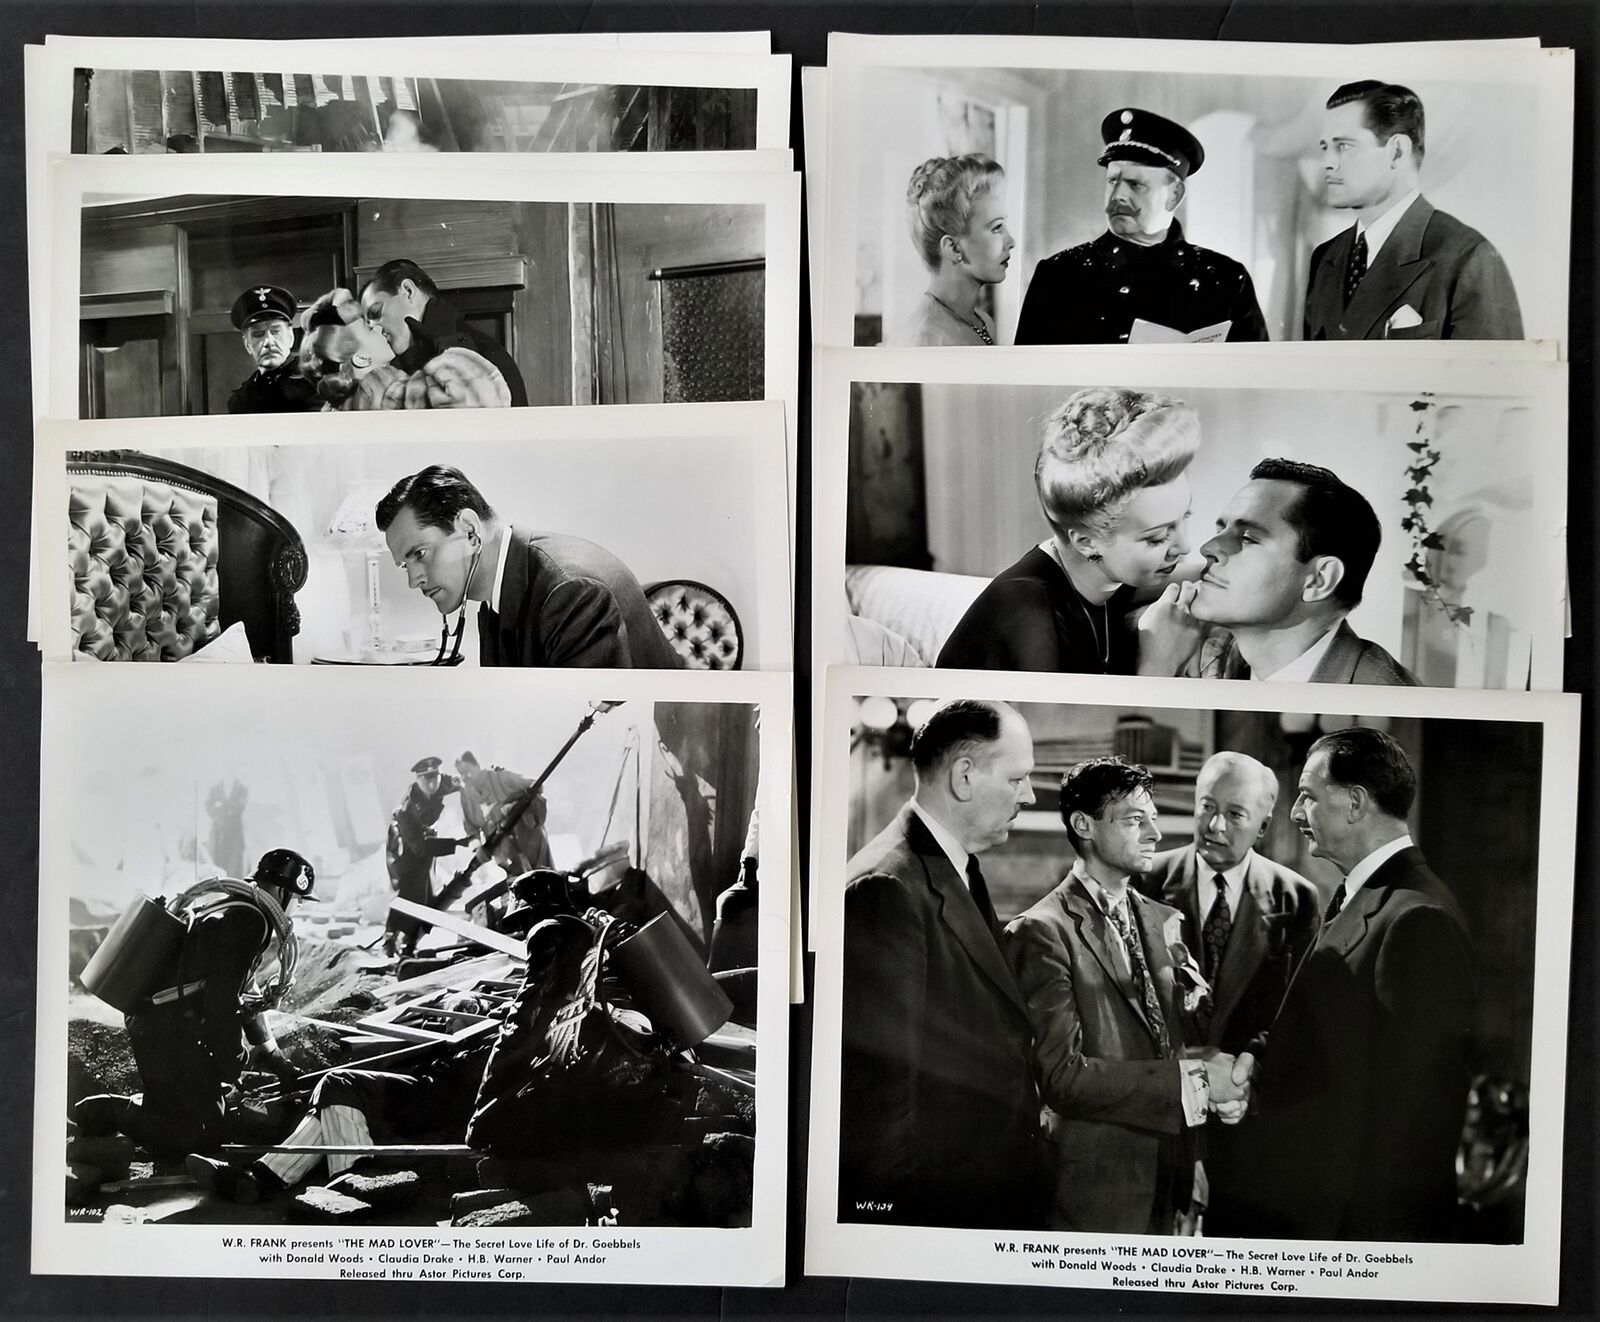 LOT 1940s vintage 12pc THE MAD LOVER movie PHOTOGRAPHS claudia drake paul andor